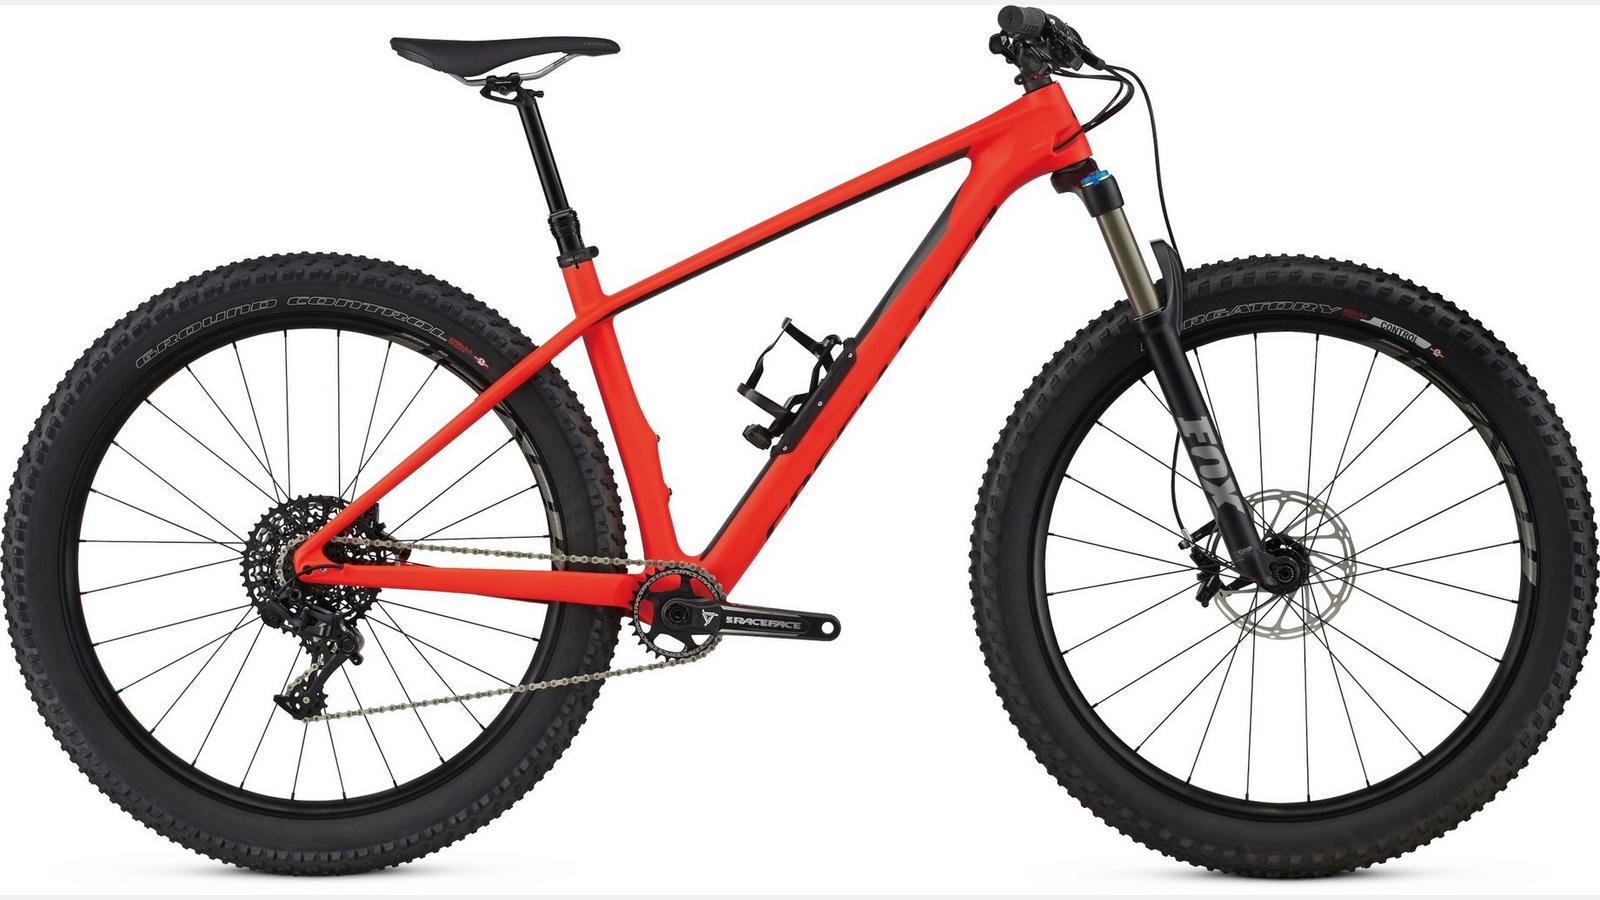 Paint for 2018 Specialized Fuse Expert Carbon 6Fattie/29 - Satin Rocket Red